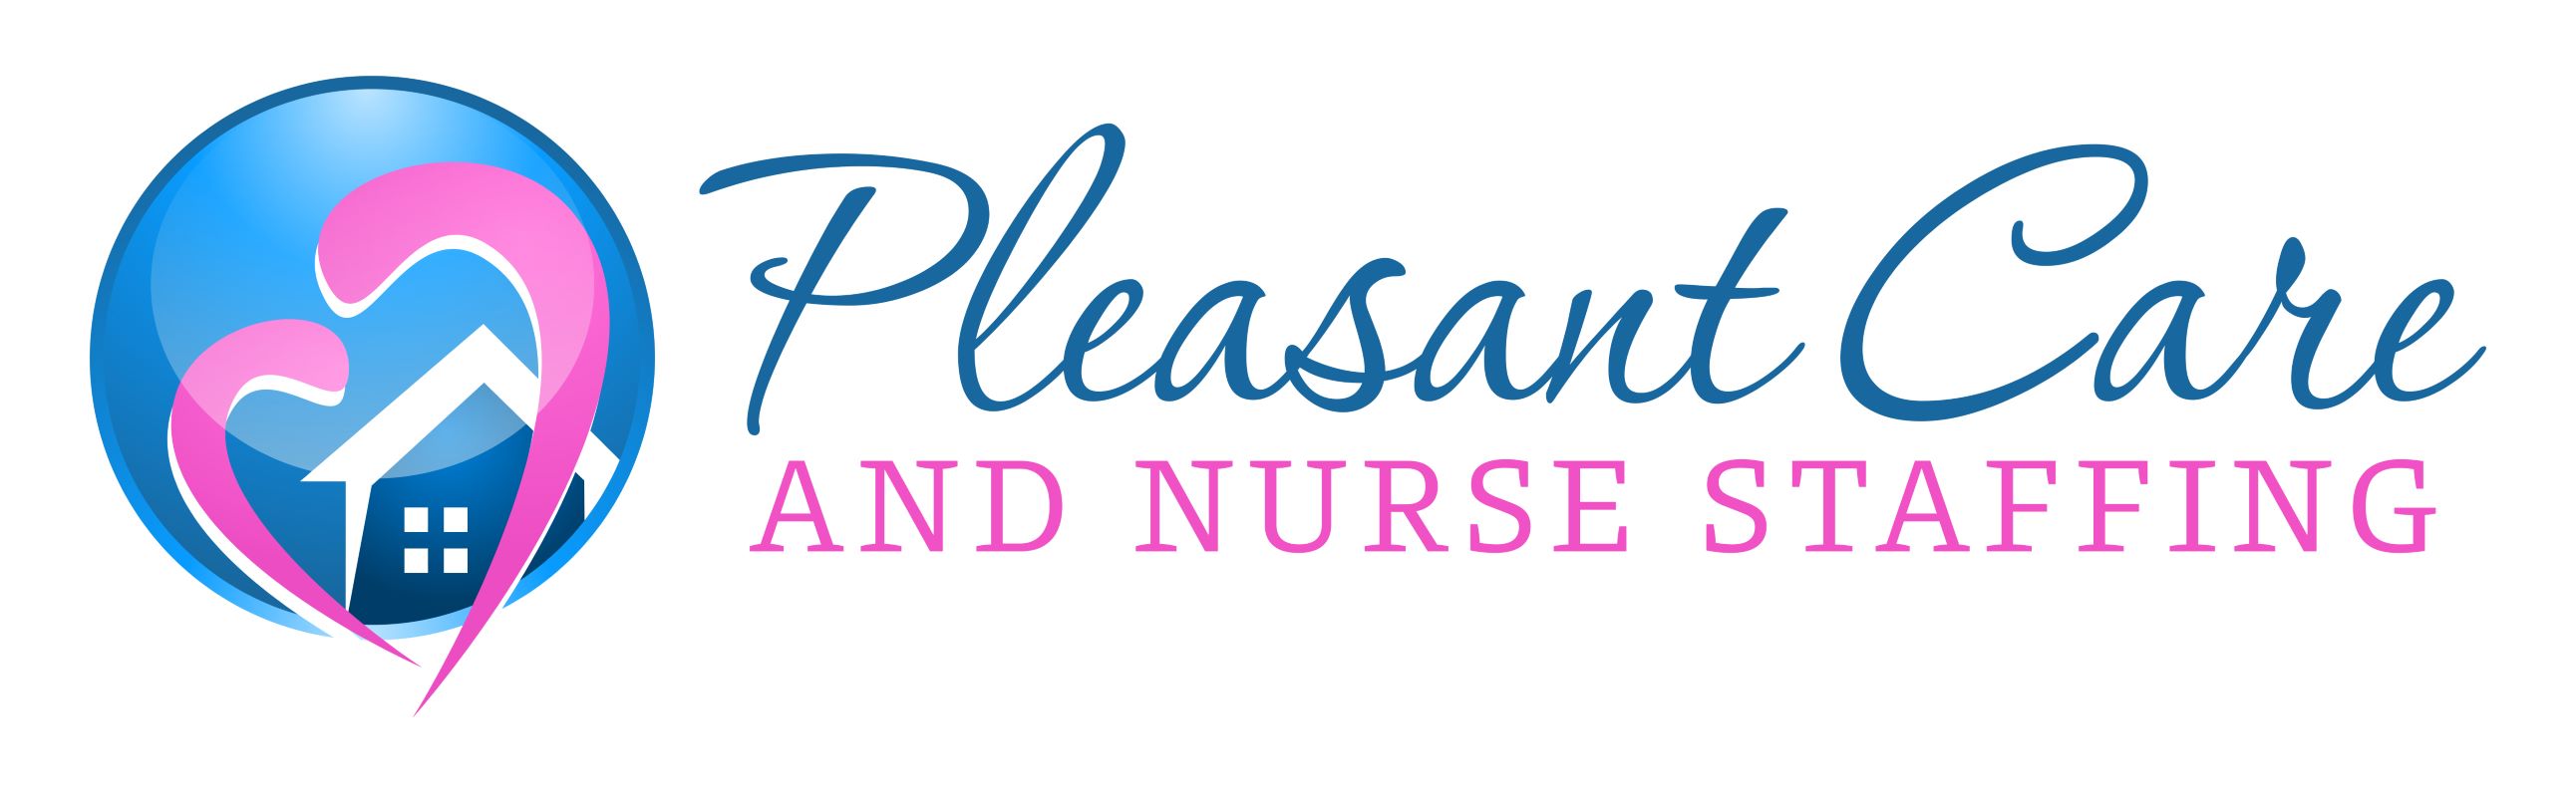 Pleasant Care and Nurse Staffing at Bowie, MD